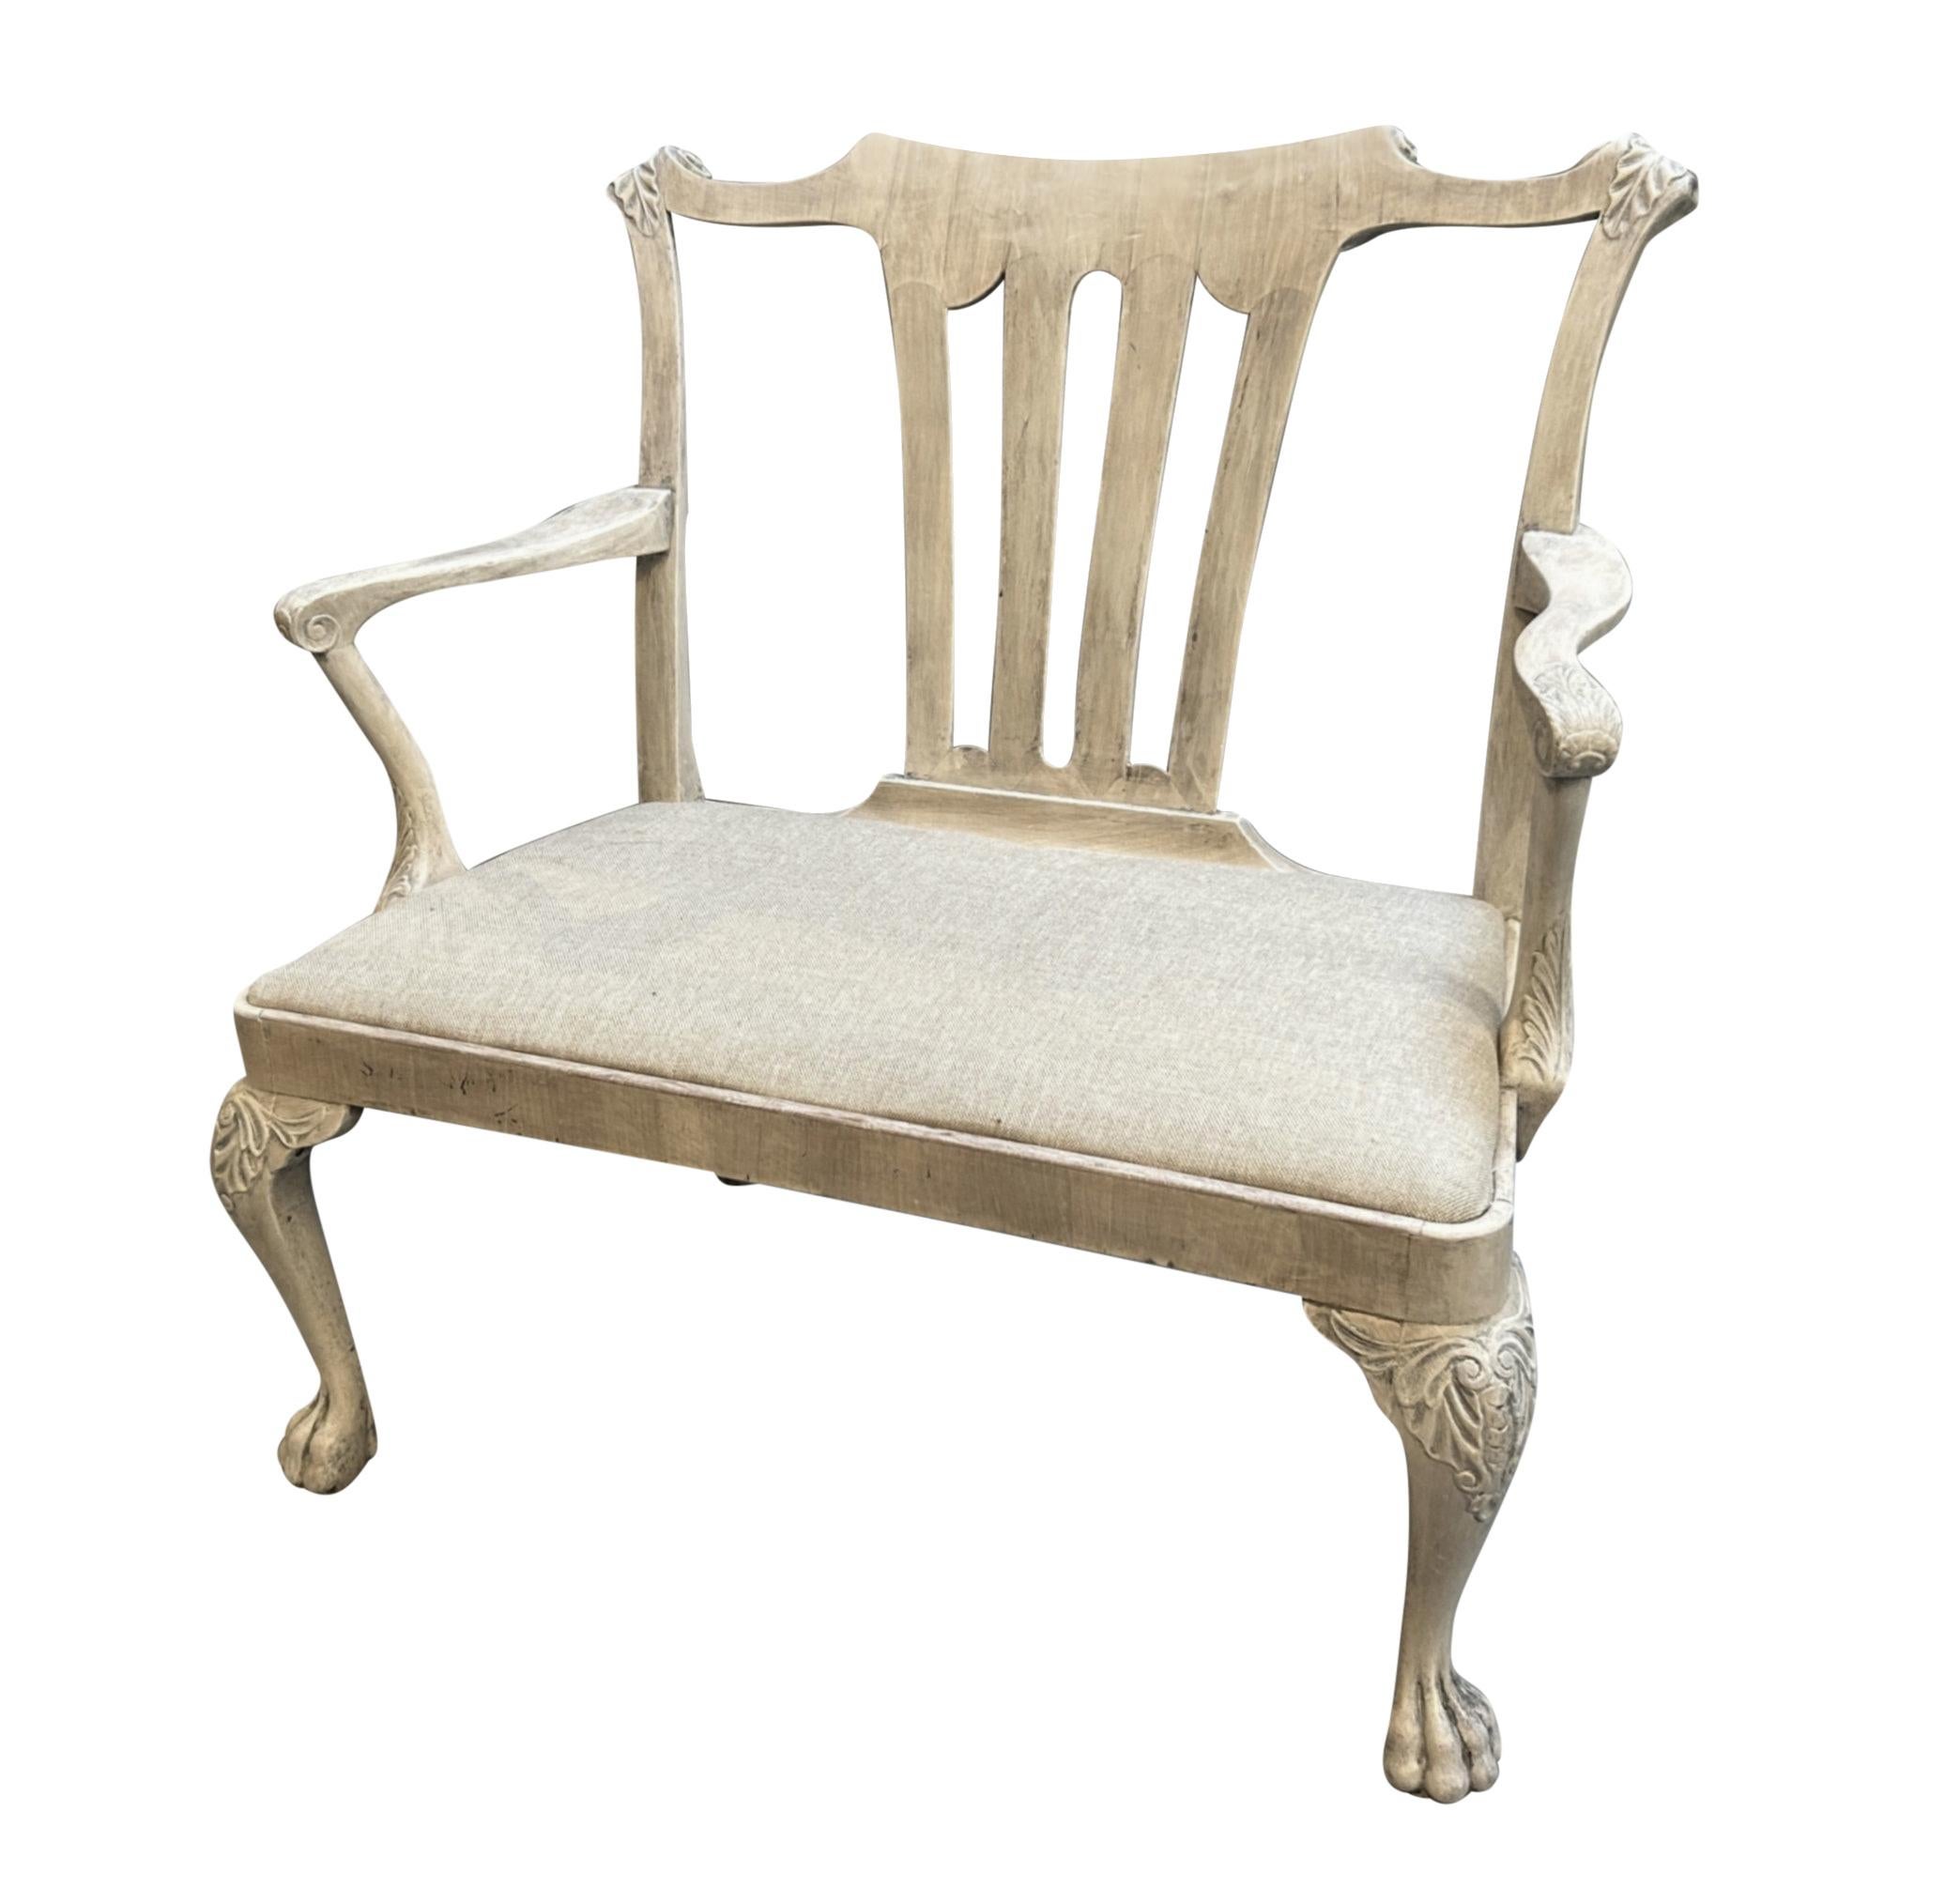 An English Georgian style, pickled mahogany settee in the manner of Syrie Maugham. With a plain linen seat, on cabriole legs with claw feet.